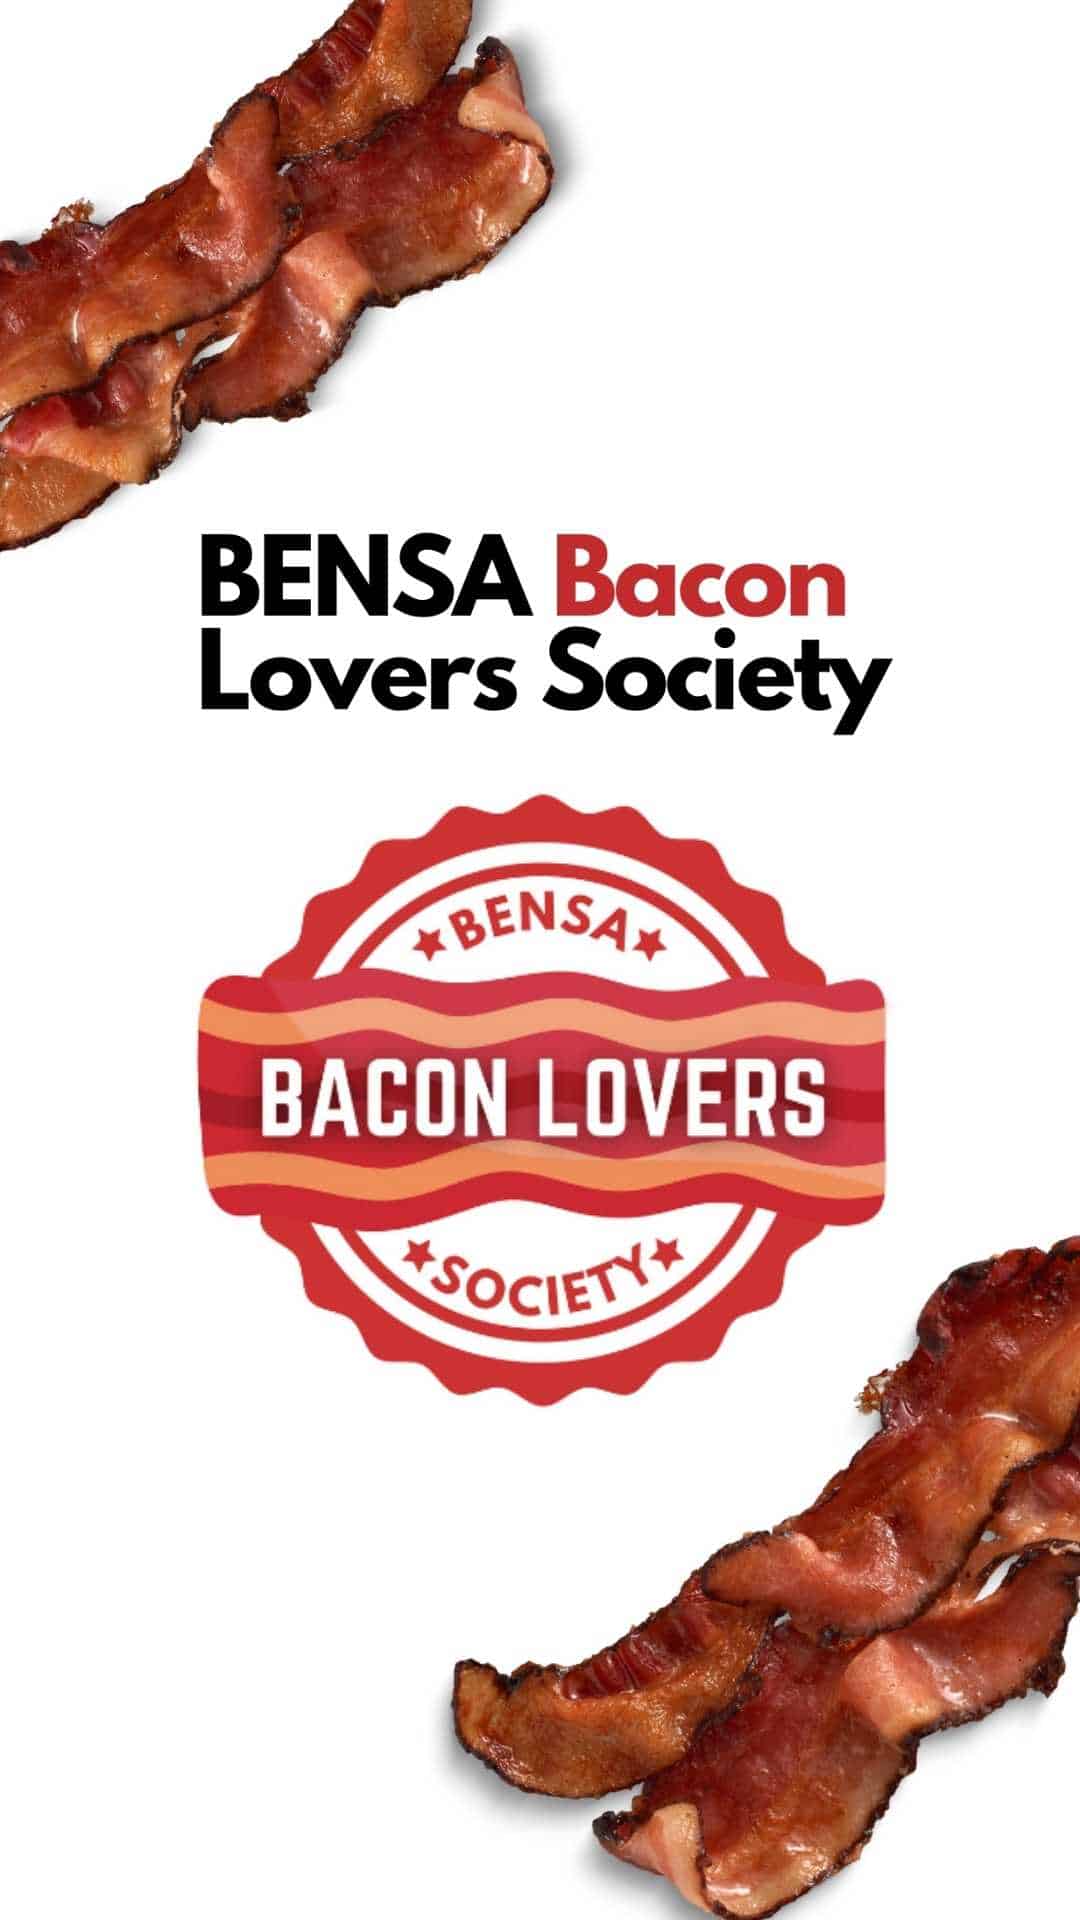 Bacon Skewers and Swizzle Sticks - BENSA Bacon Lovers Society